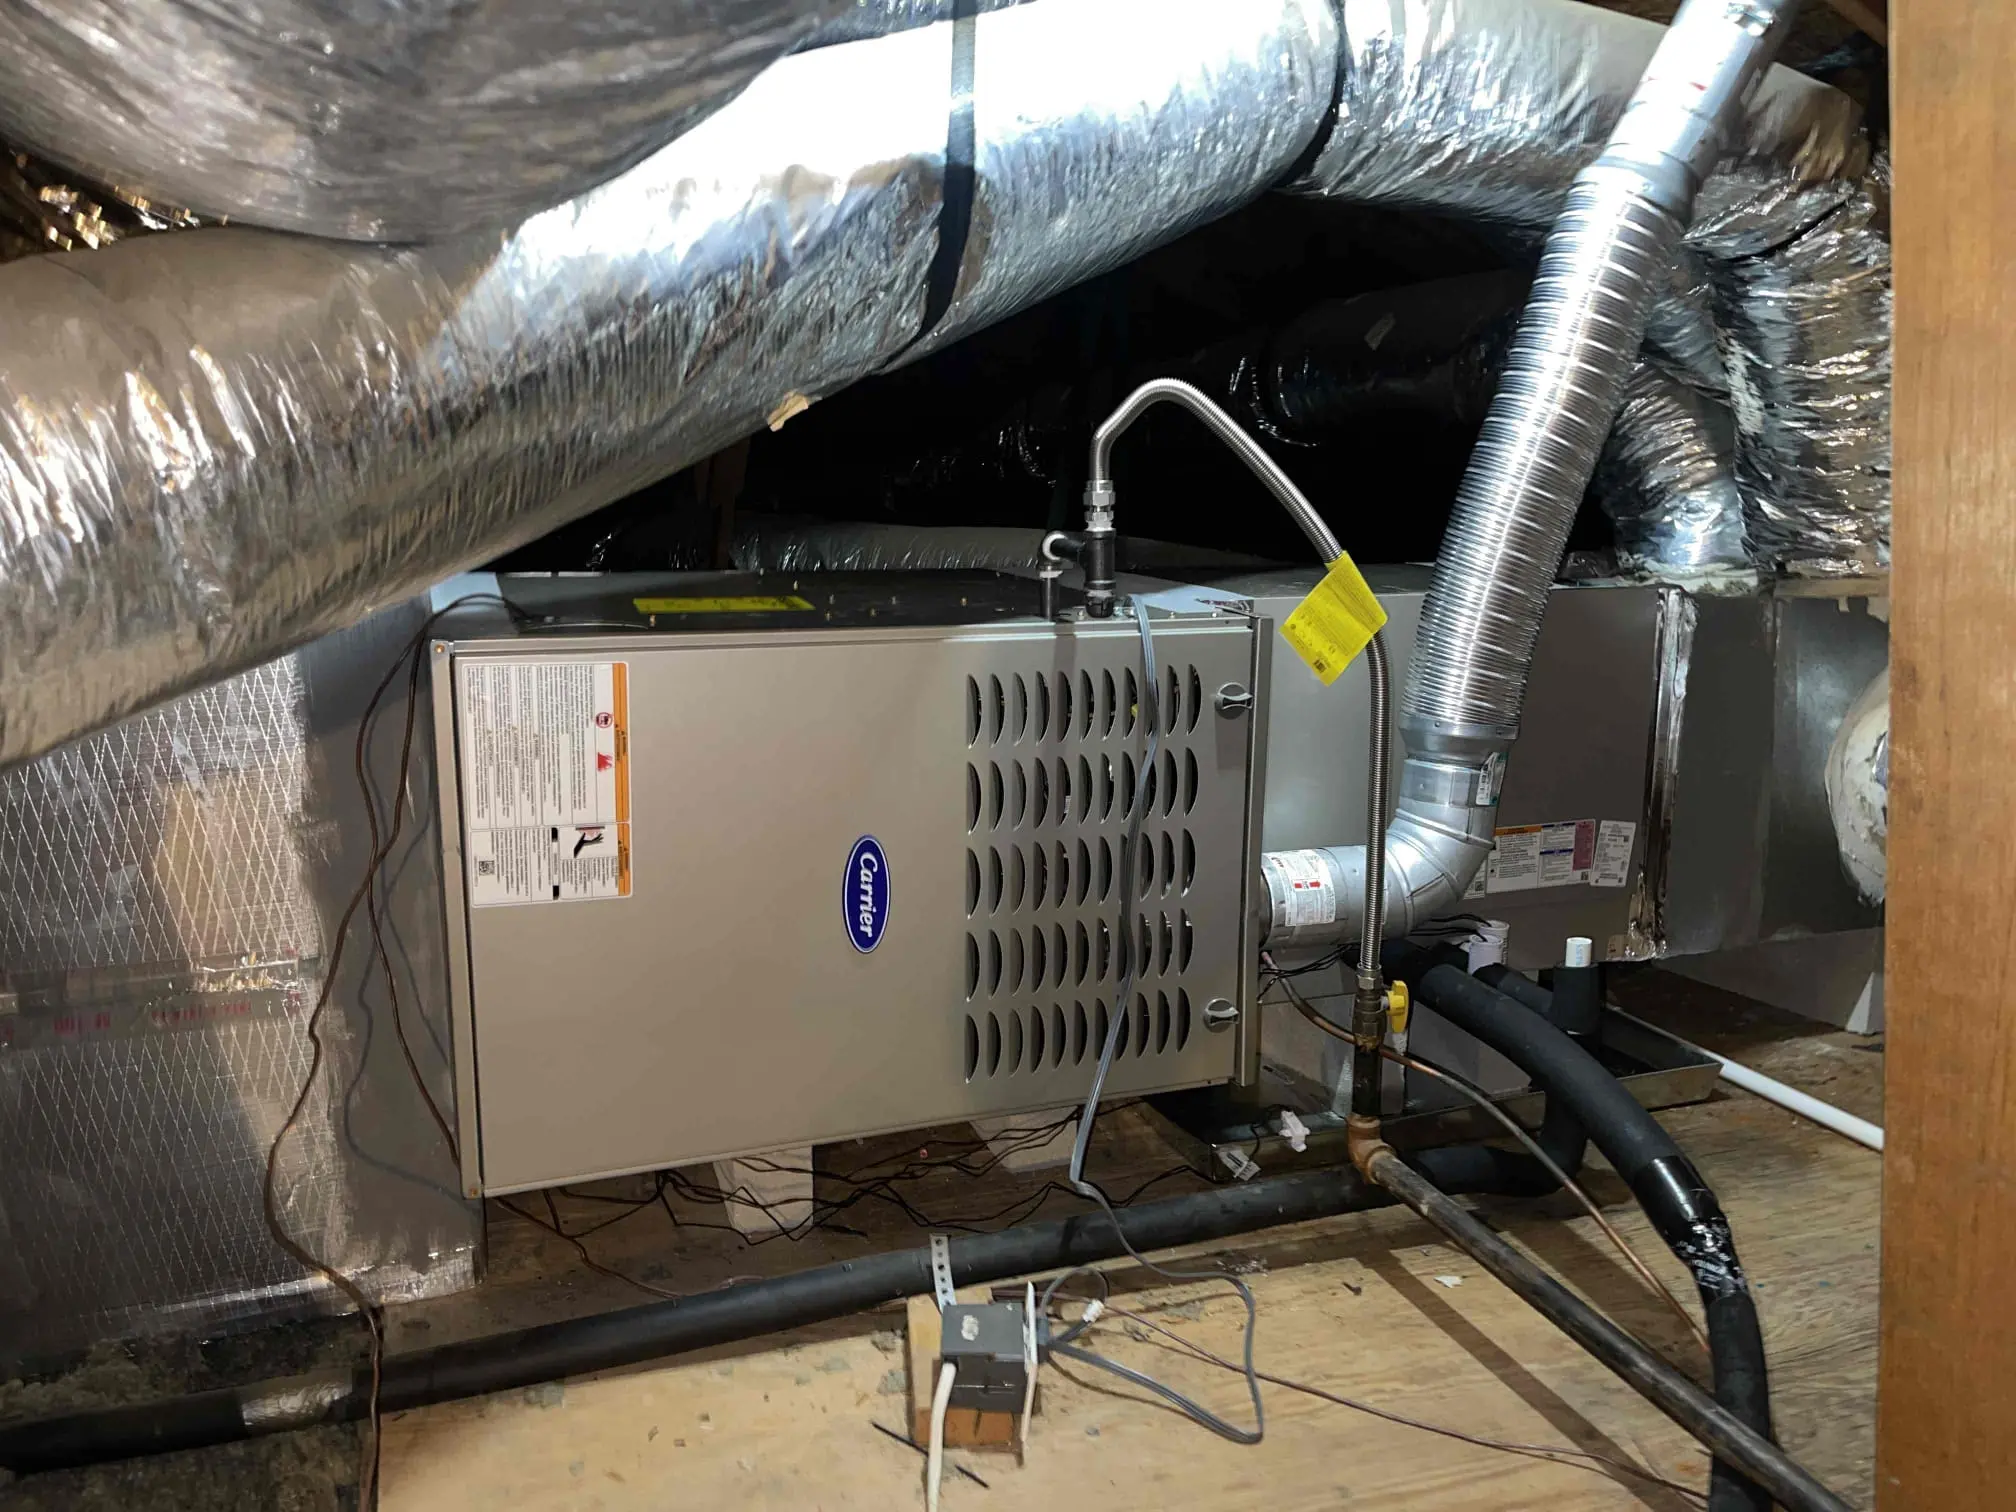 New Furnace Cost Guide - Furnace Replacement Cost